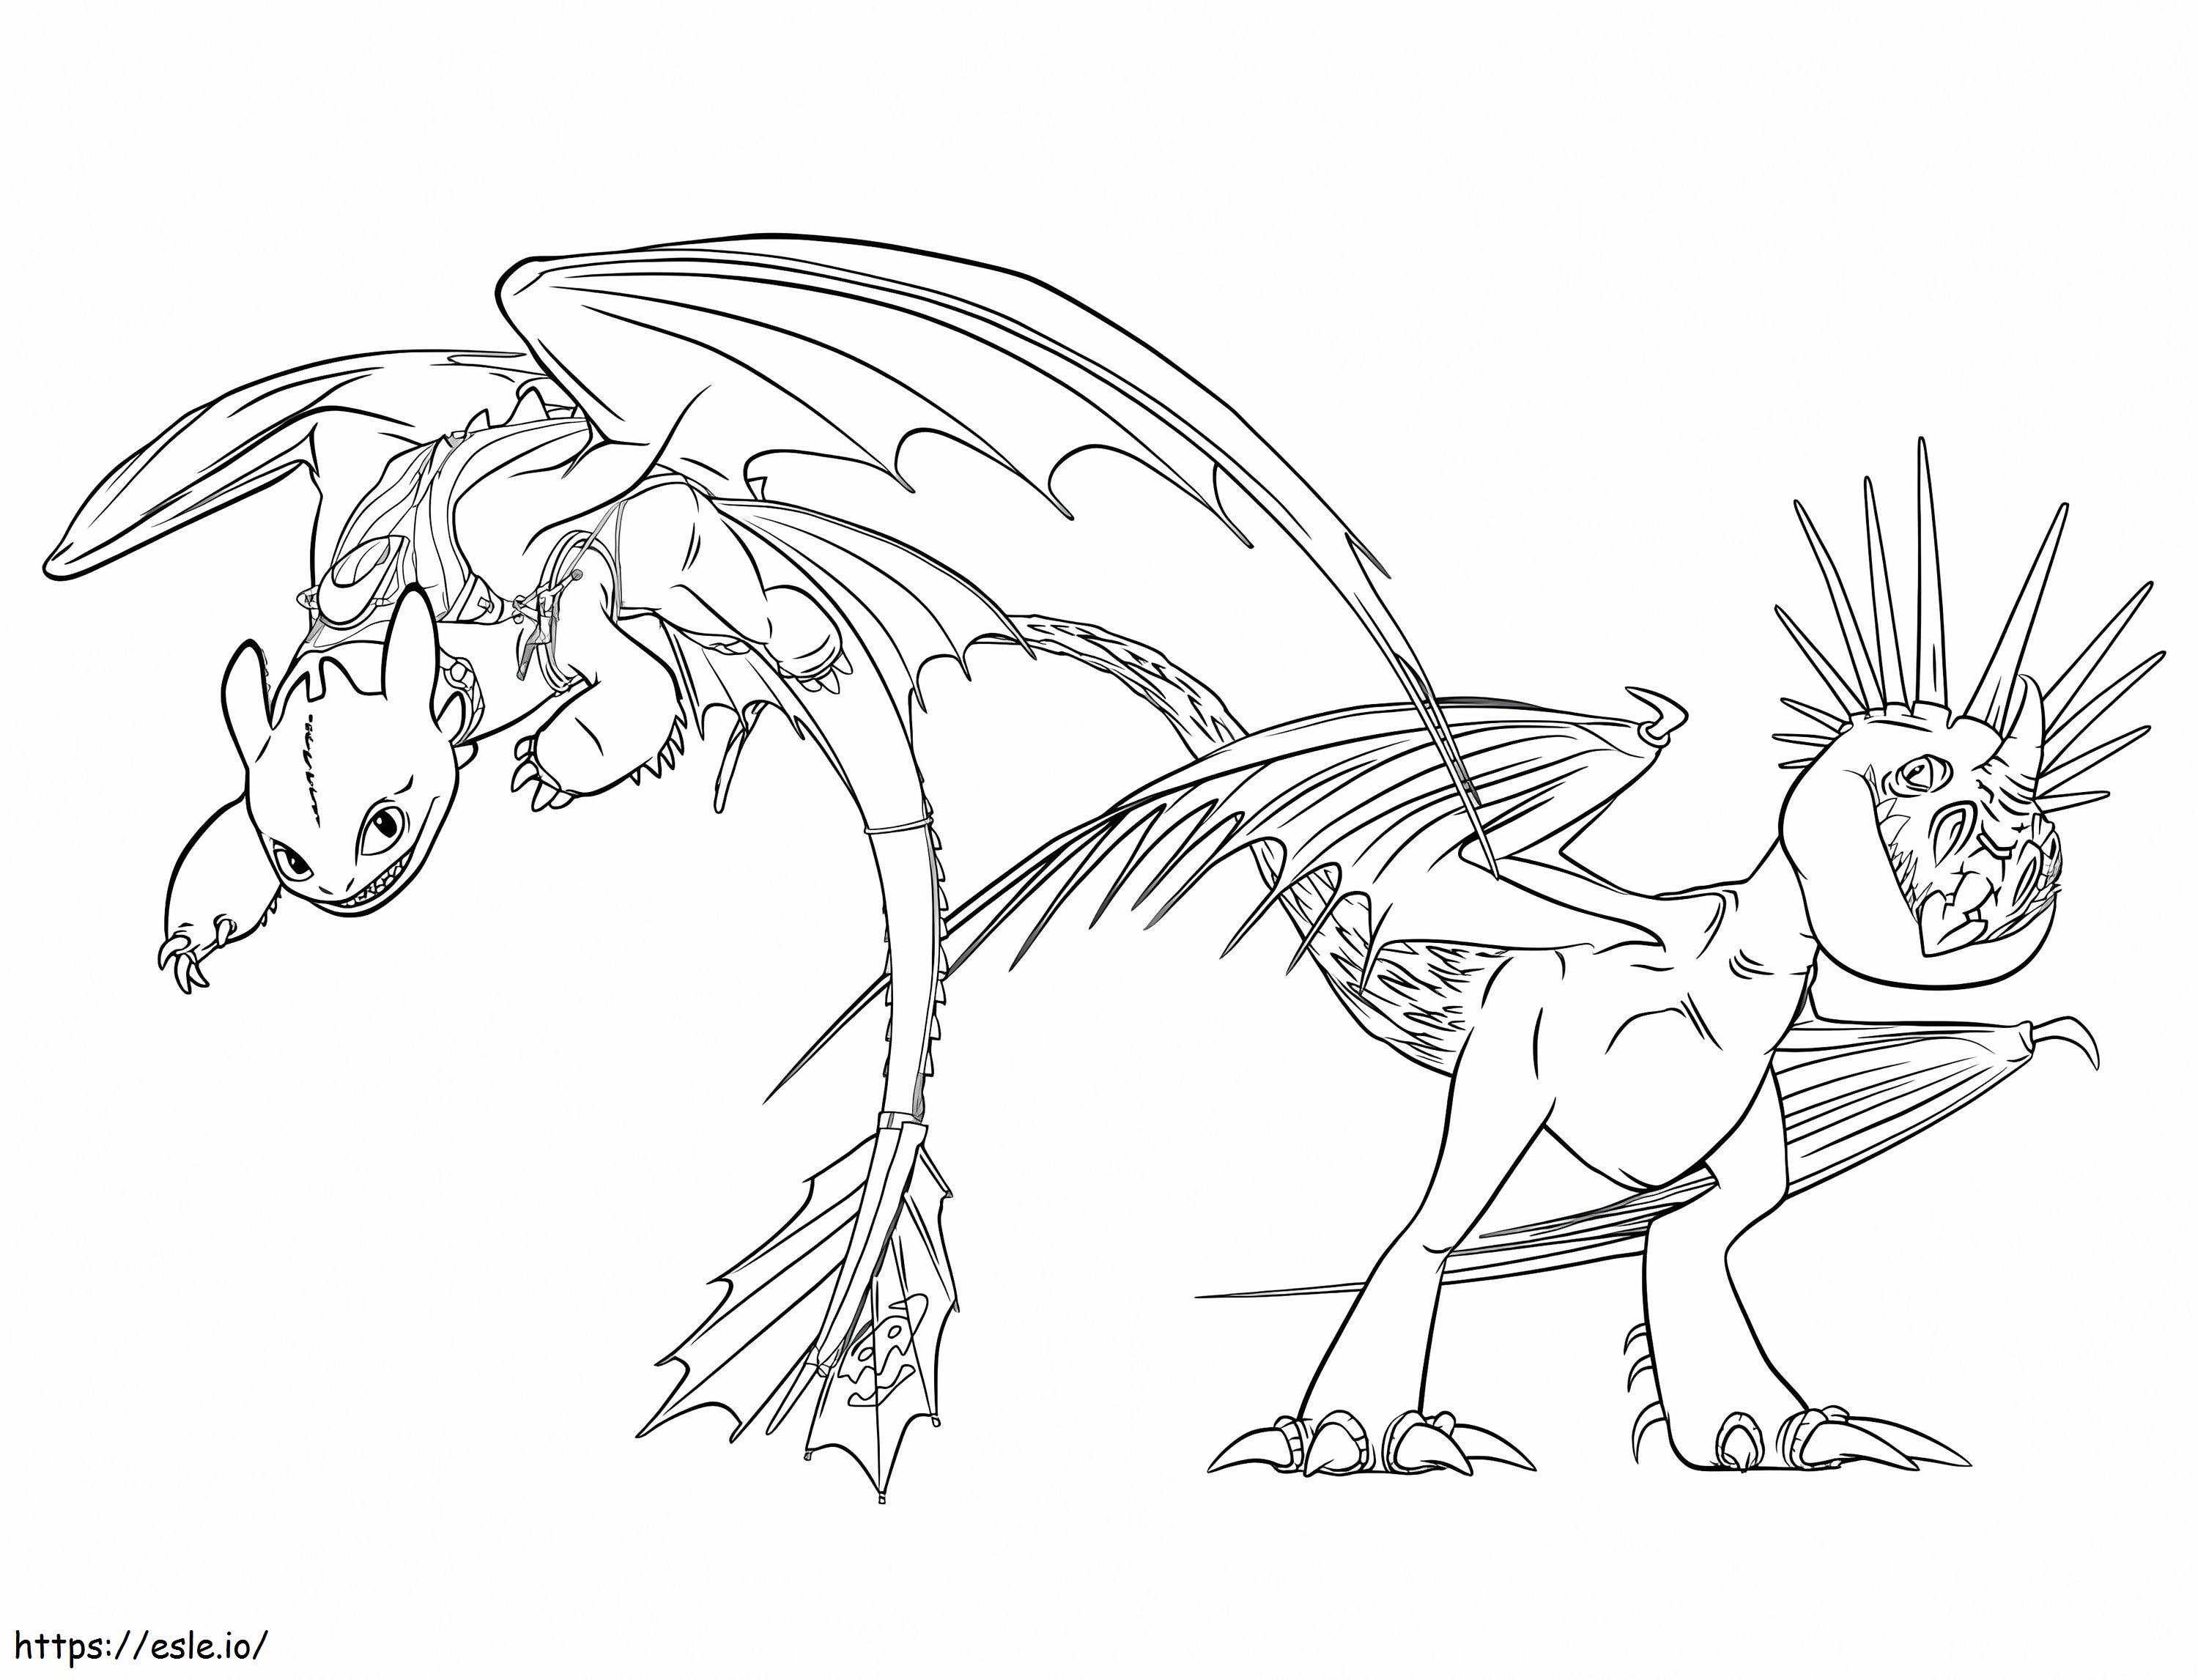 Toothless and stormfly coloring page